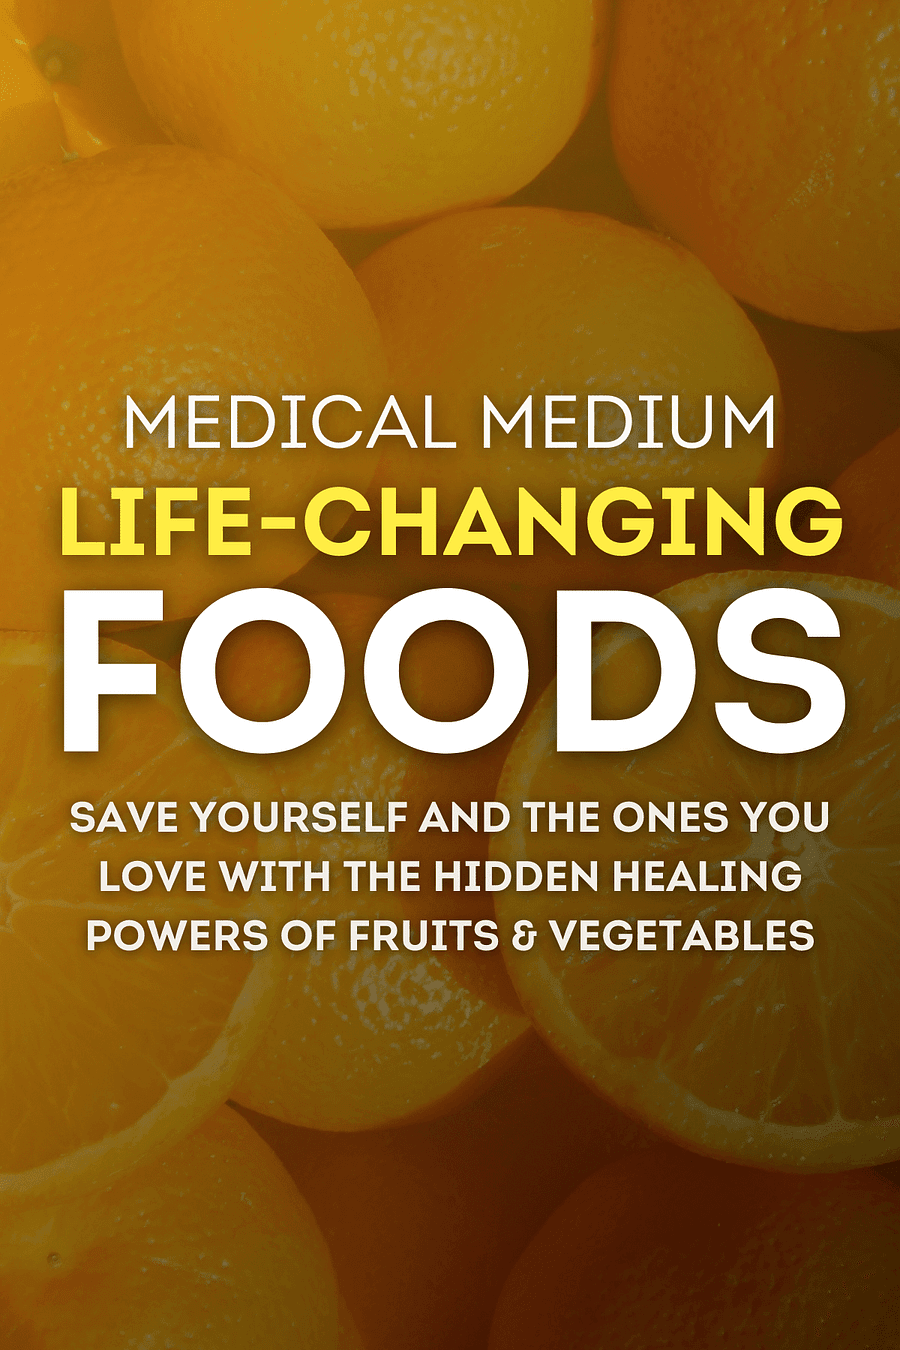 Medical Medium Life-Changing Foods by Anthony William - Book Summary